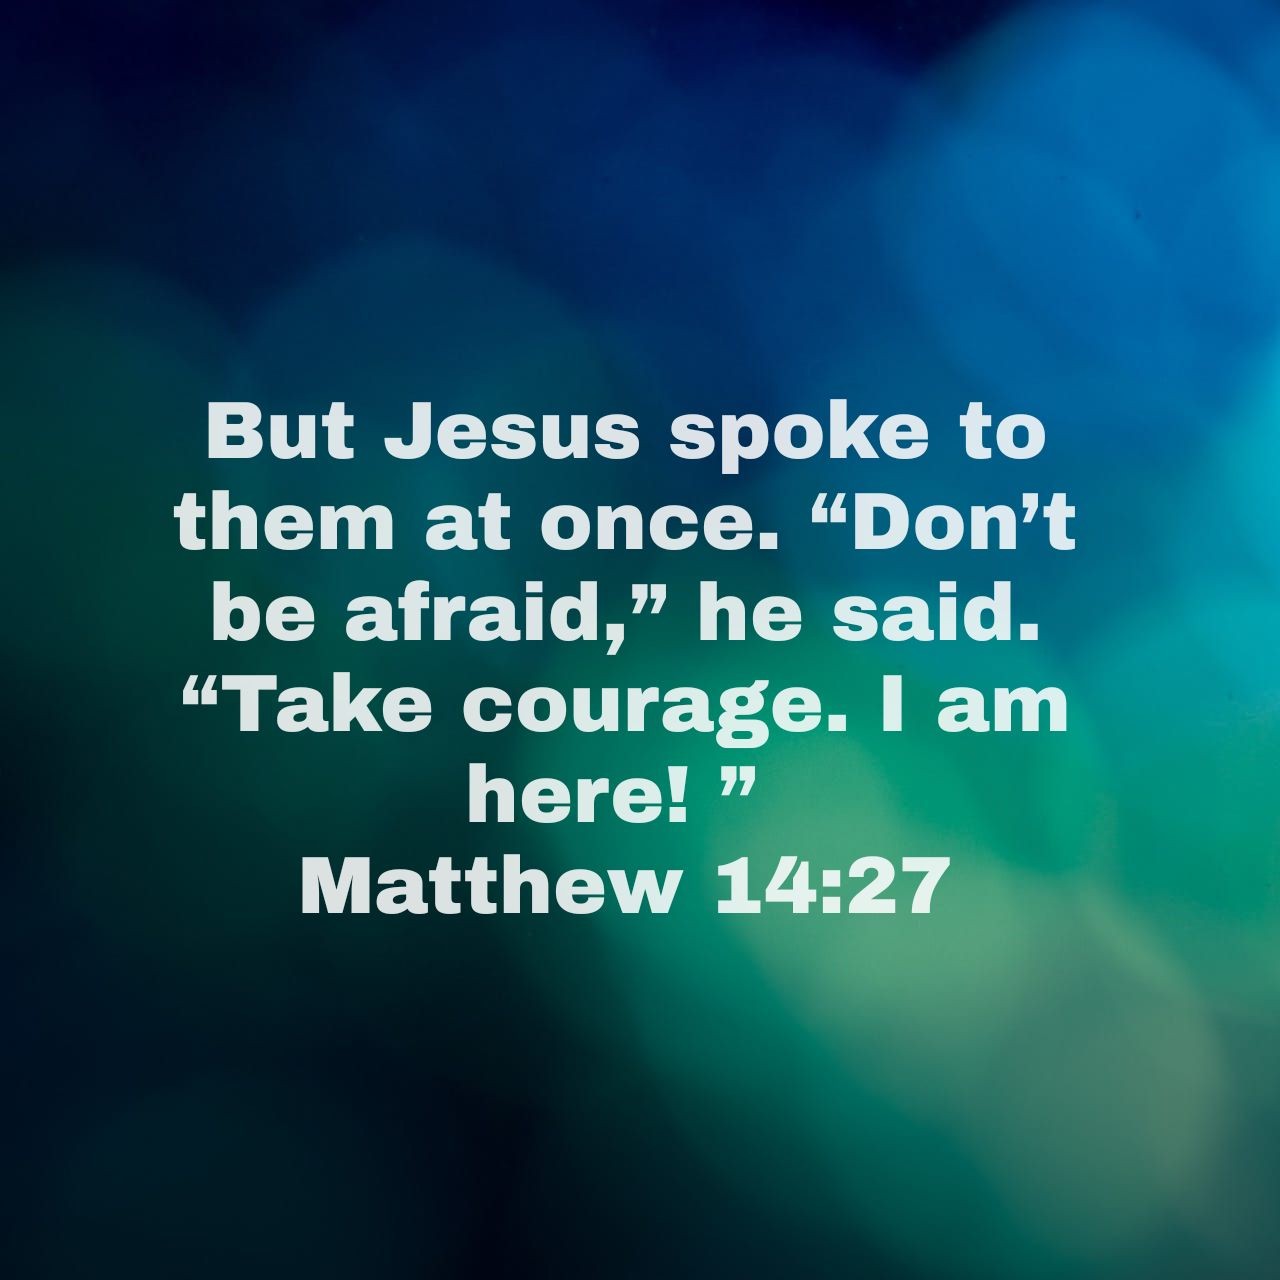 We Don’t Need to Fear With Jesus at Our Side